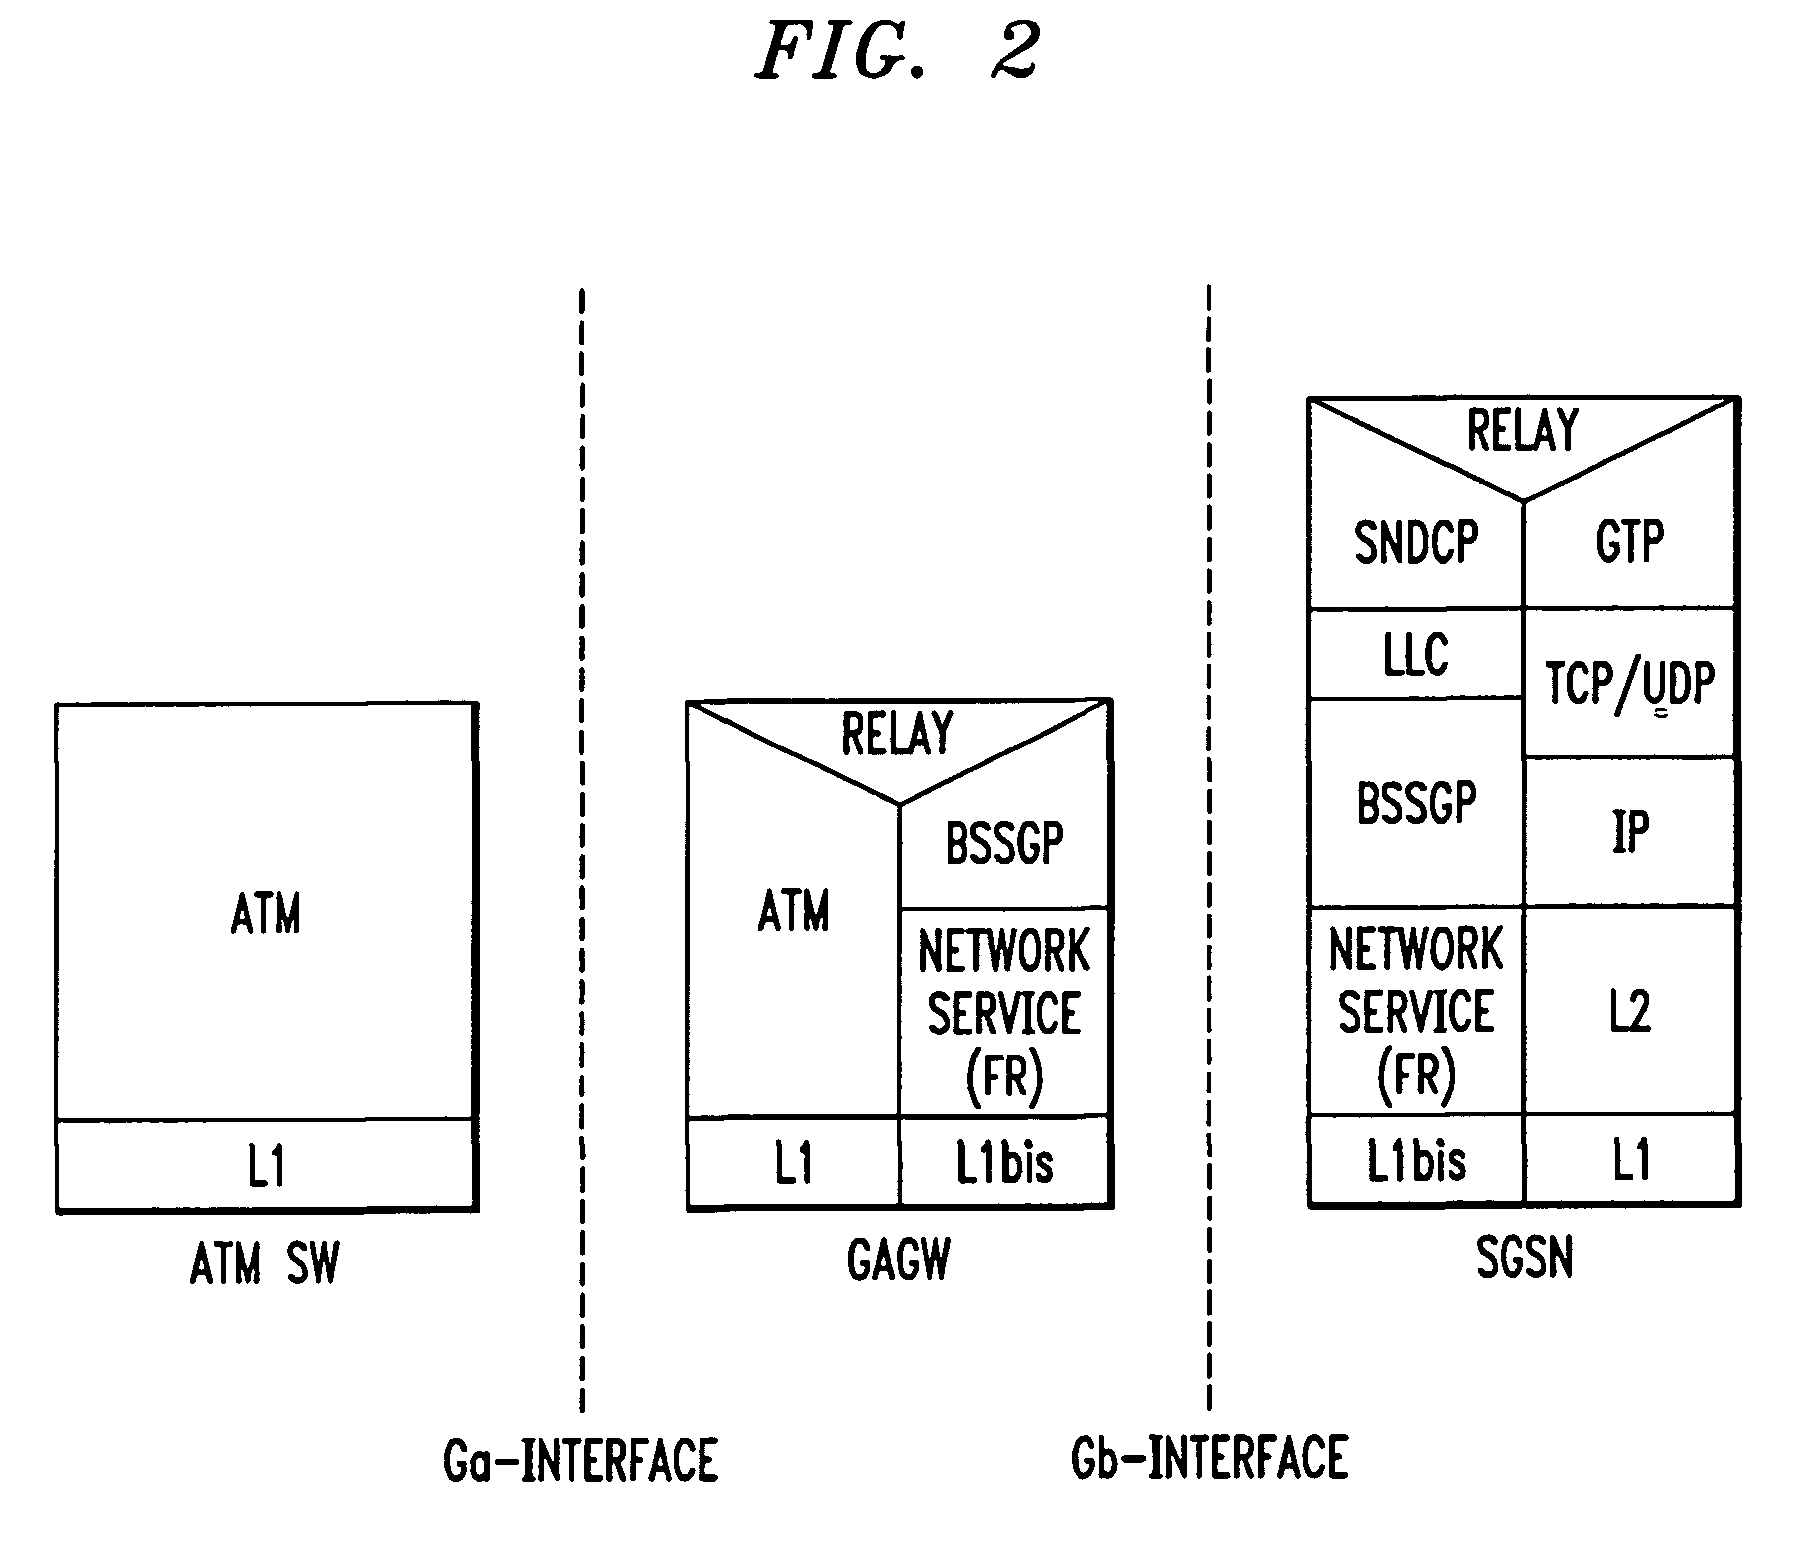 Method for integrating wired and wireless packet/cell networking via ATM